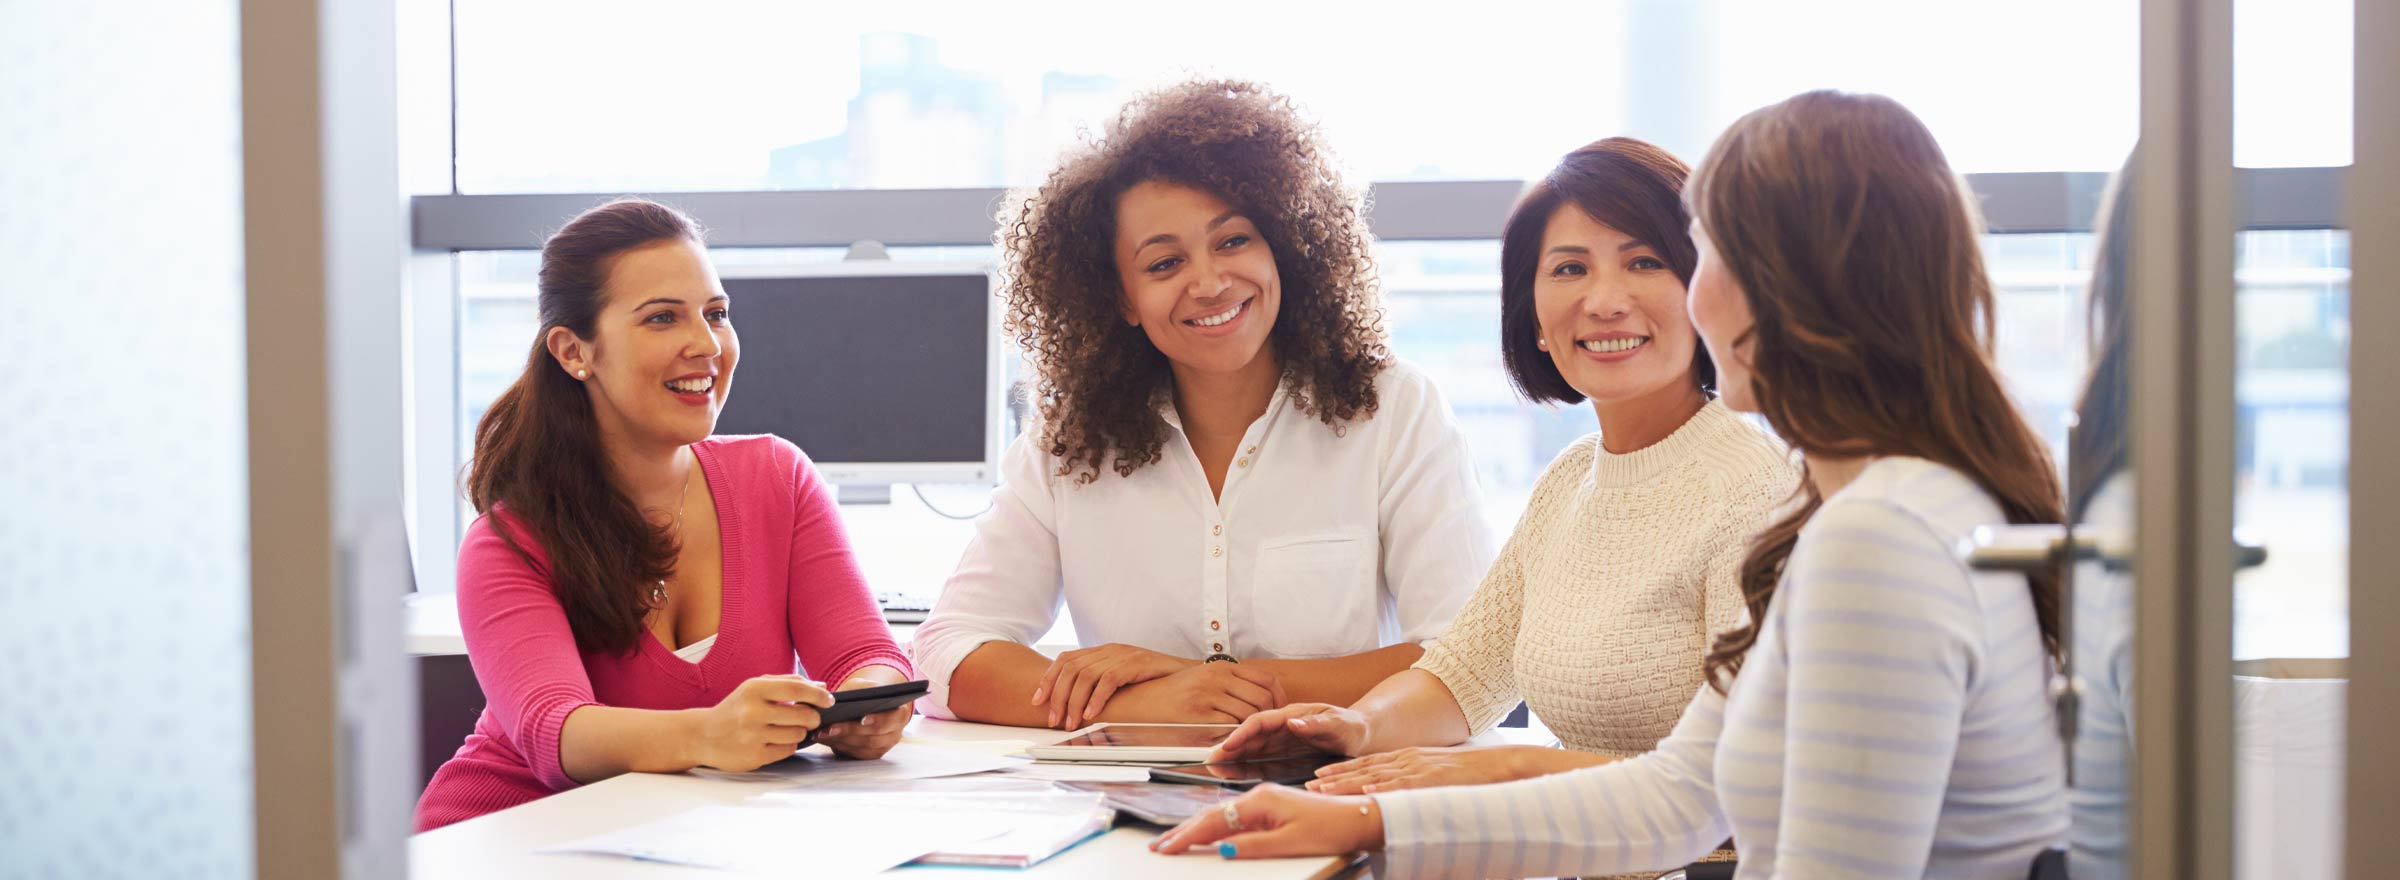 diverse group of four women meeting at a conference table